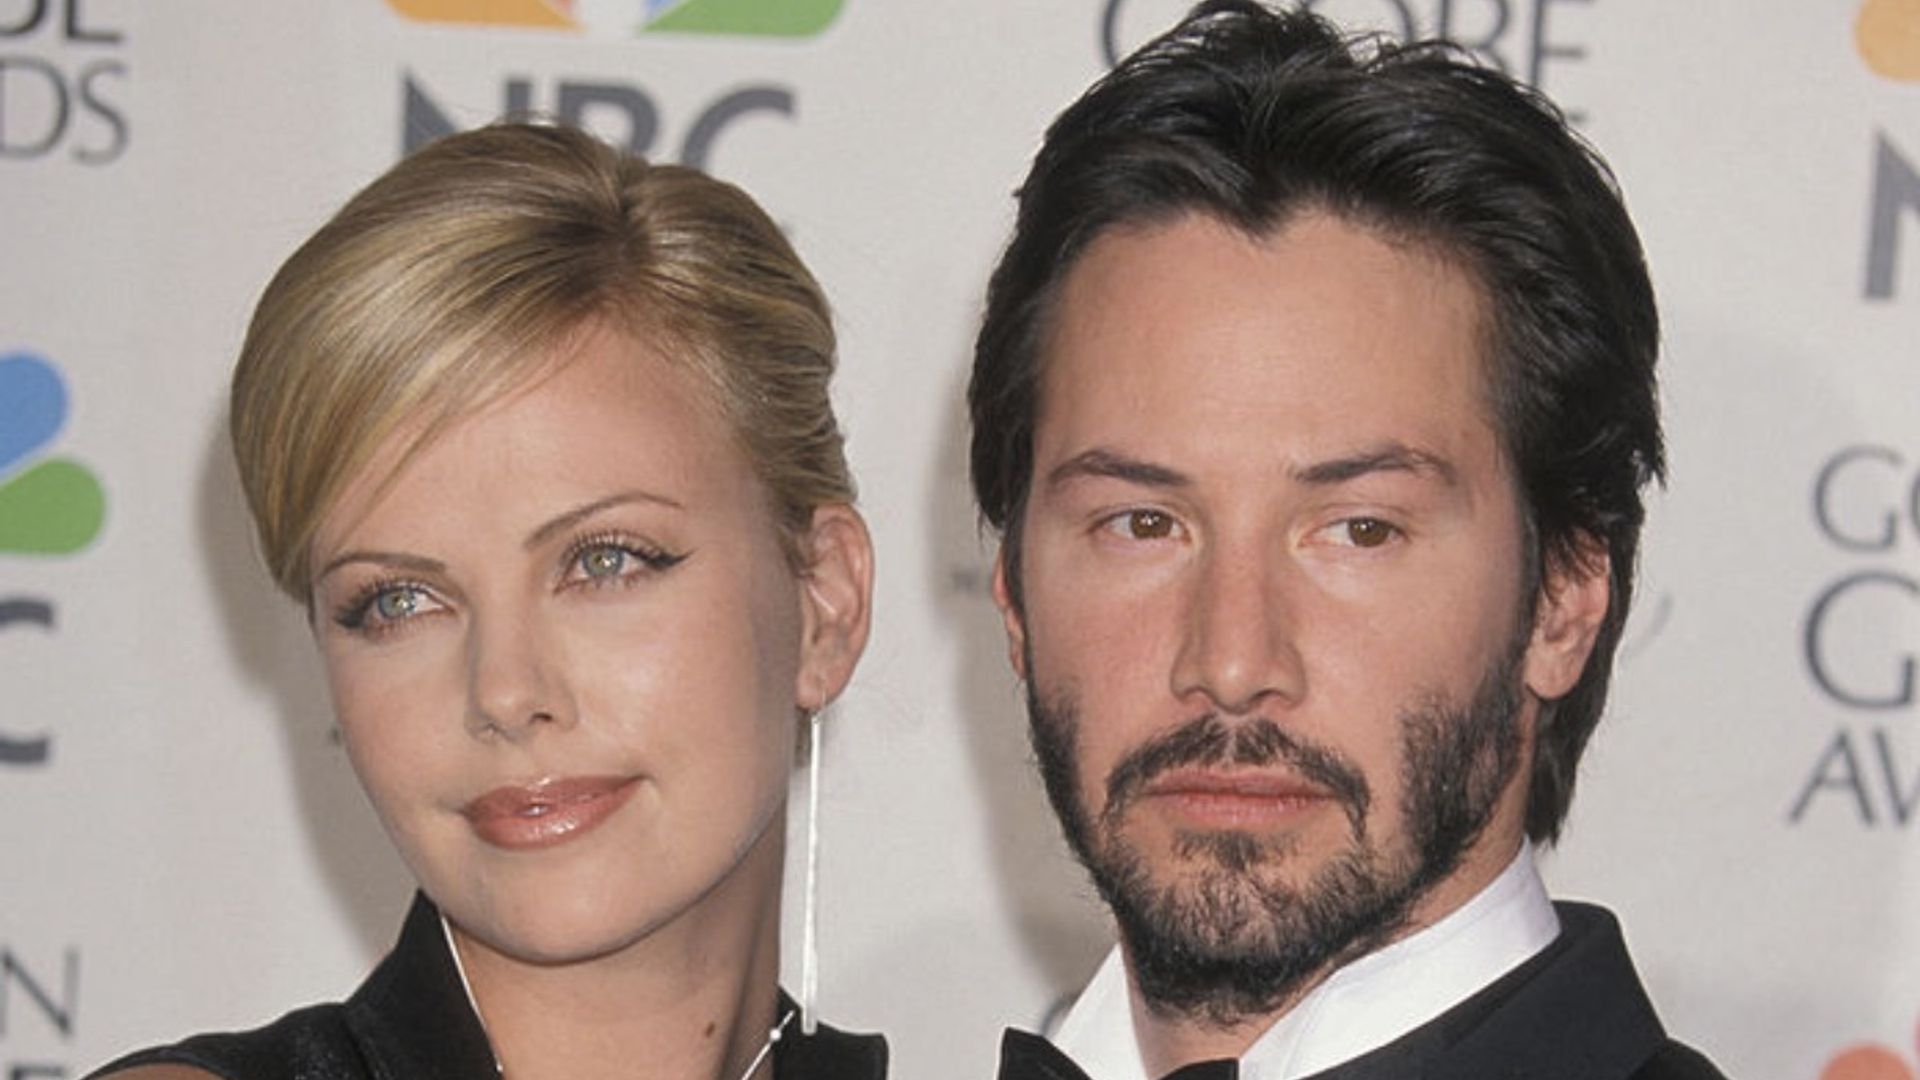 Charlize Theron declares love for Keanu Reeves in heartfelt birthday message - and fans go wild